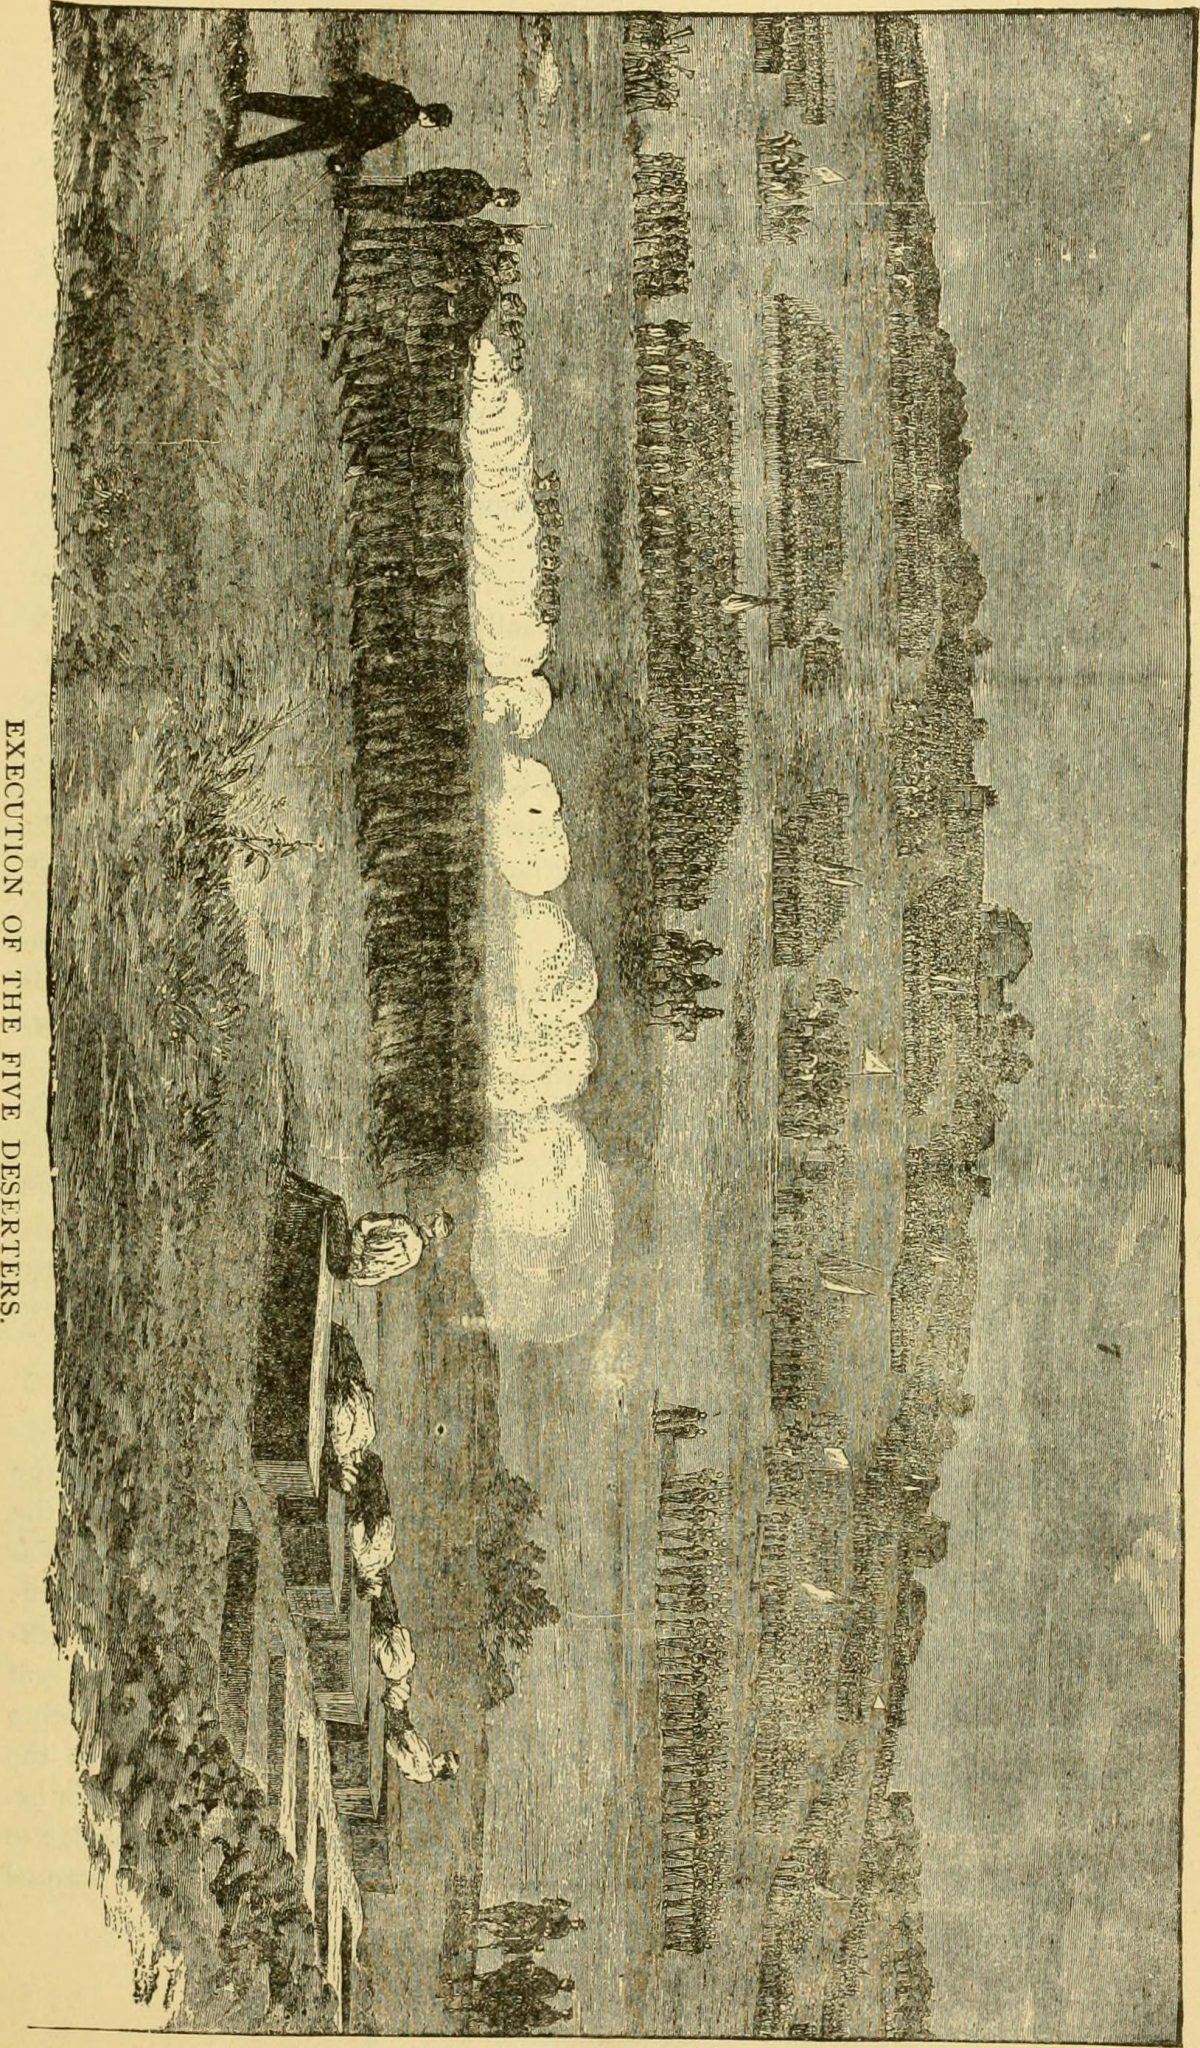 Image from page 352 of "History of the Corn Exchange Regiment, 118th Pennsylvania Volunteers, from their first engagement at Antietam to Appomattox. To which is added a record of its organization and a complete roster. Fully illustrated with maps, portrai